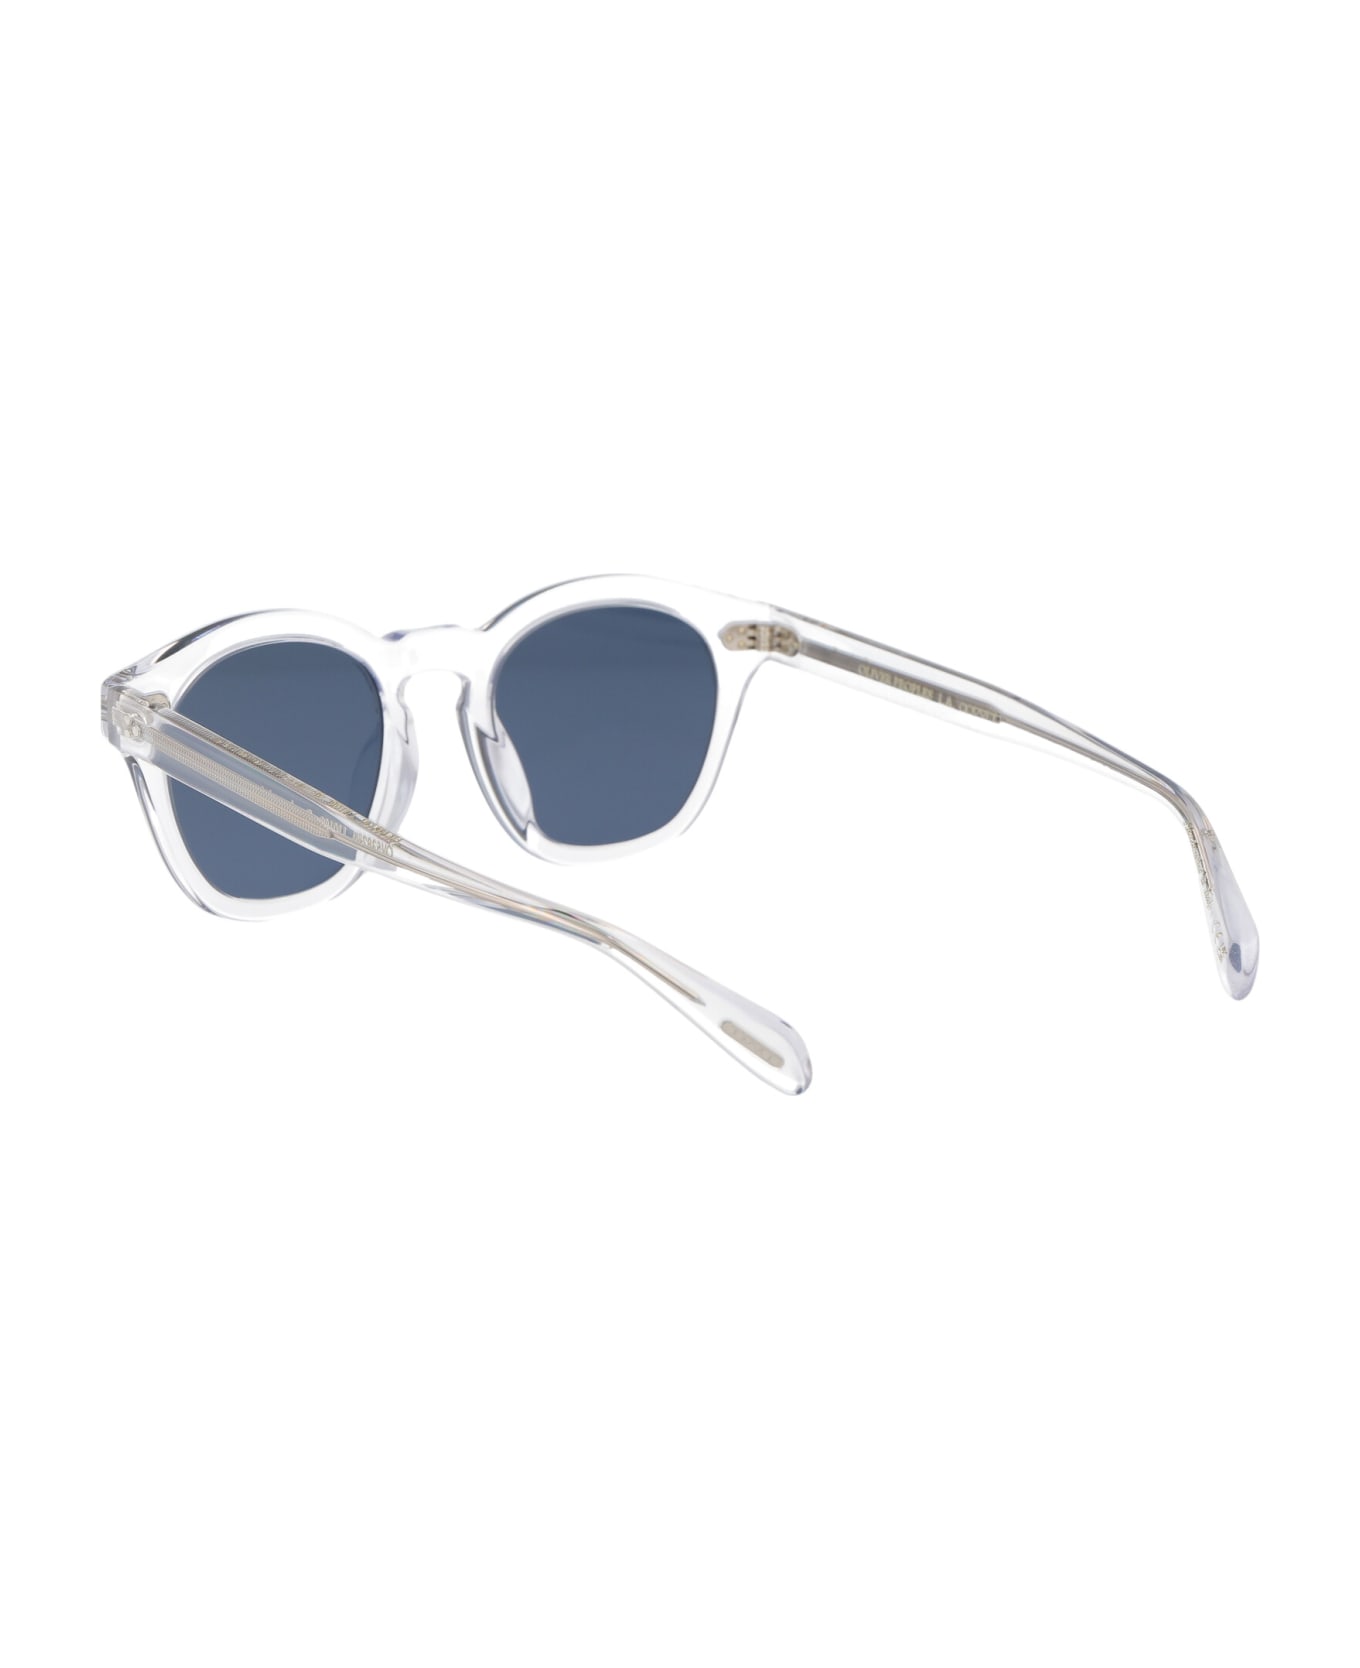 Oliver Peoples Boudreau L.a Sunglasses - 110180 Crystal